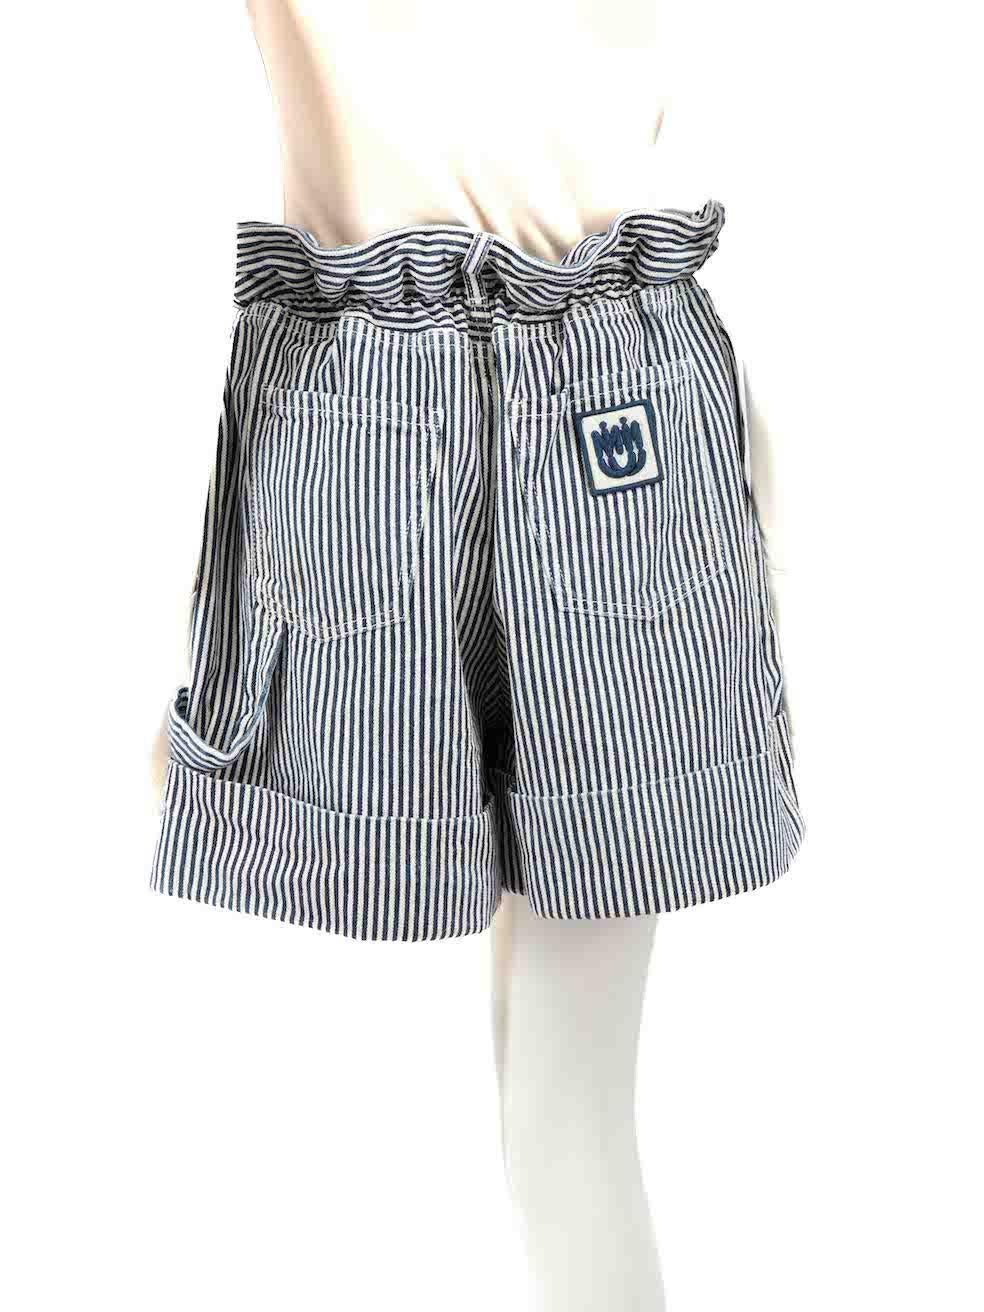 Miu Miu 2019 Navy Striped Shorts Size XXL In Good Condition For Sale In London, GB